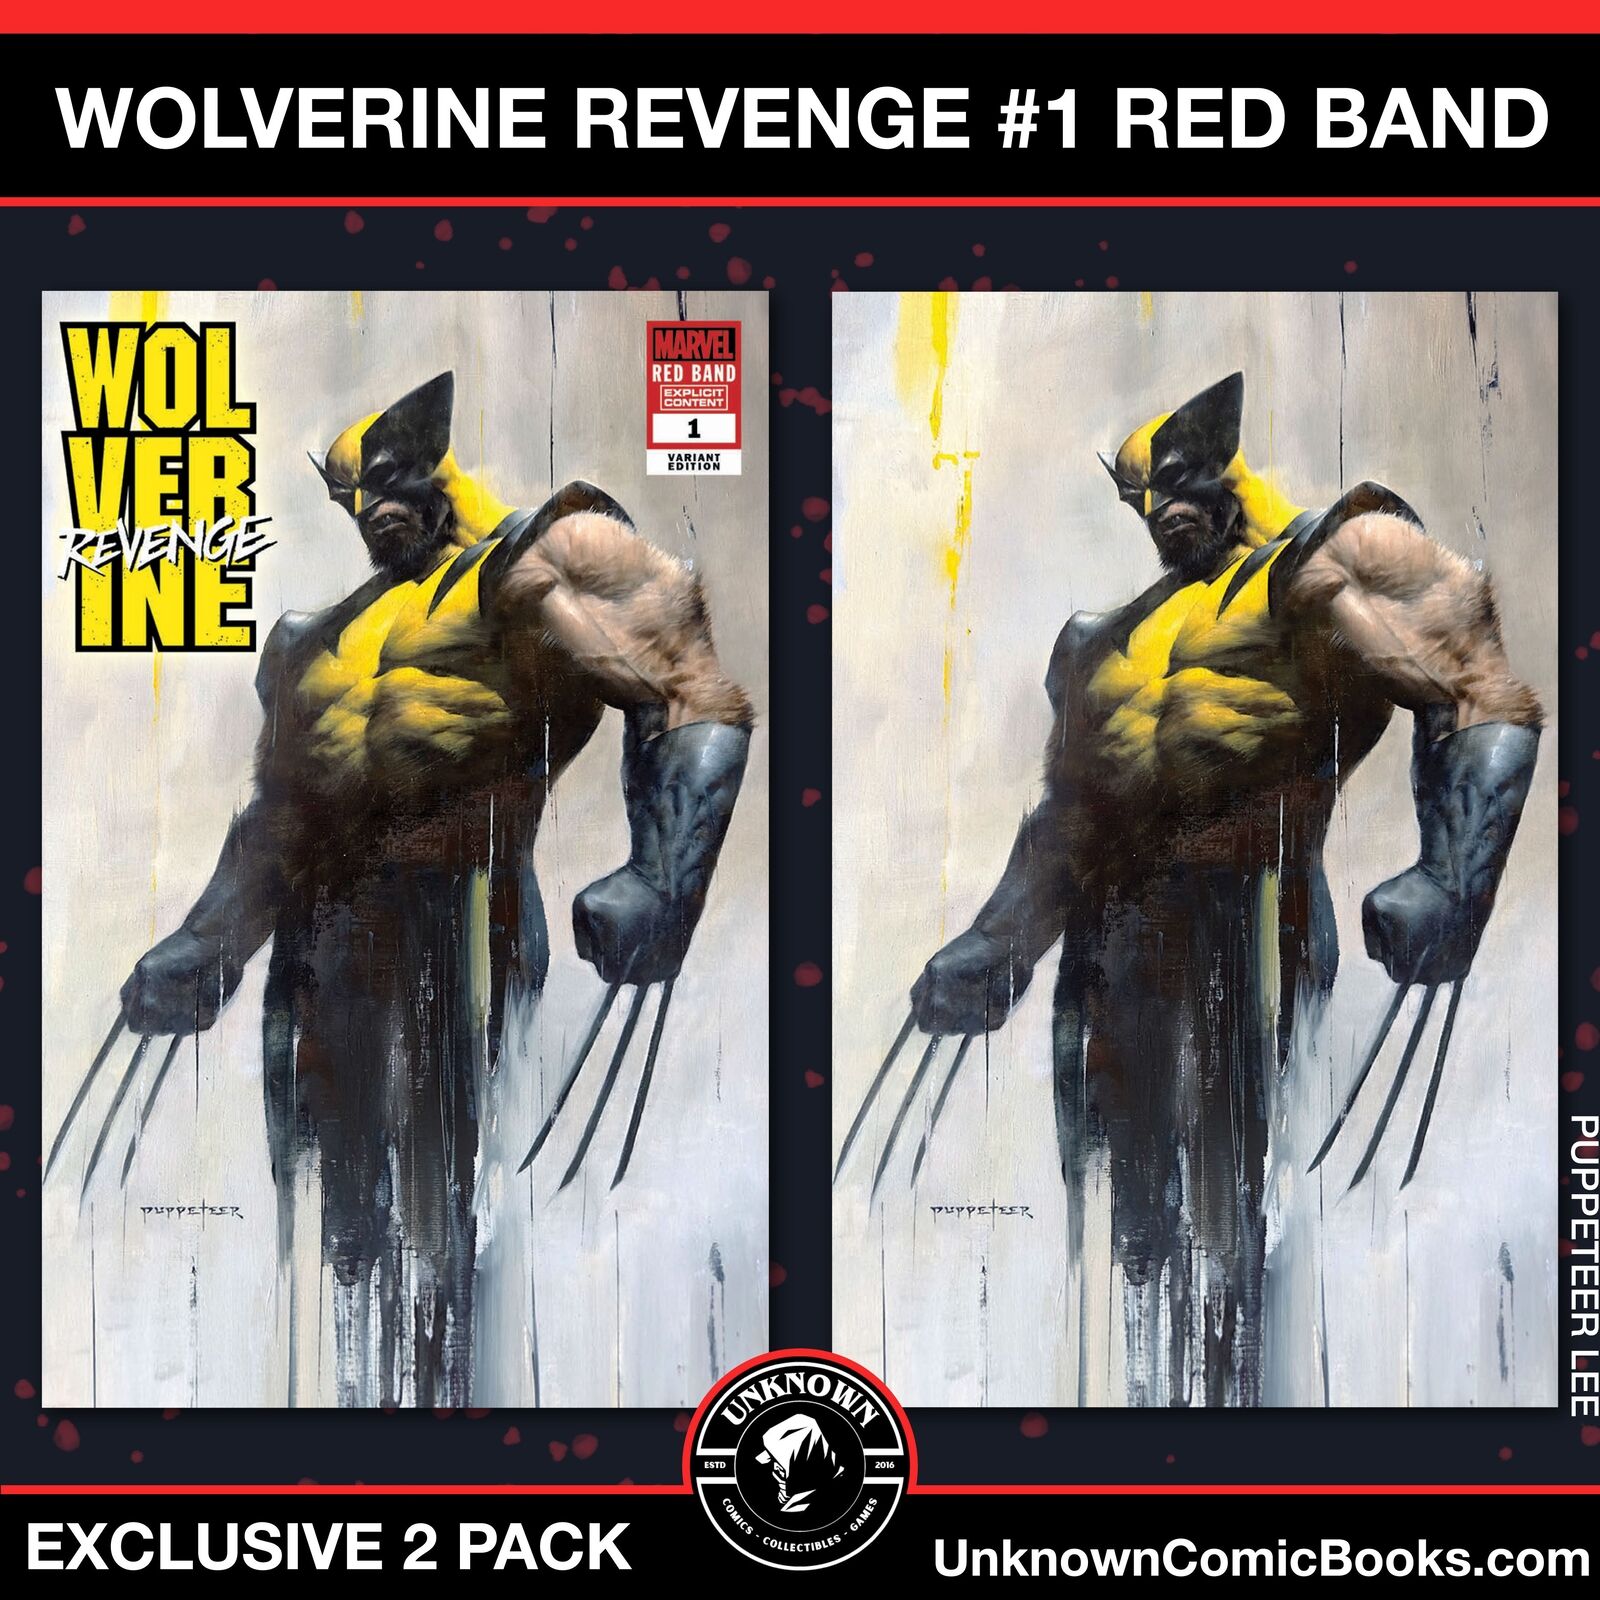 [2 PACK] WOLVERINE: REVENGE - RED BAND #1 UNKNOWN COMICS PUPPETTER LEE EXCLUSIVE